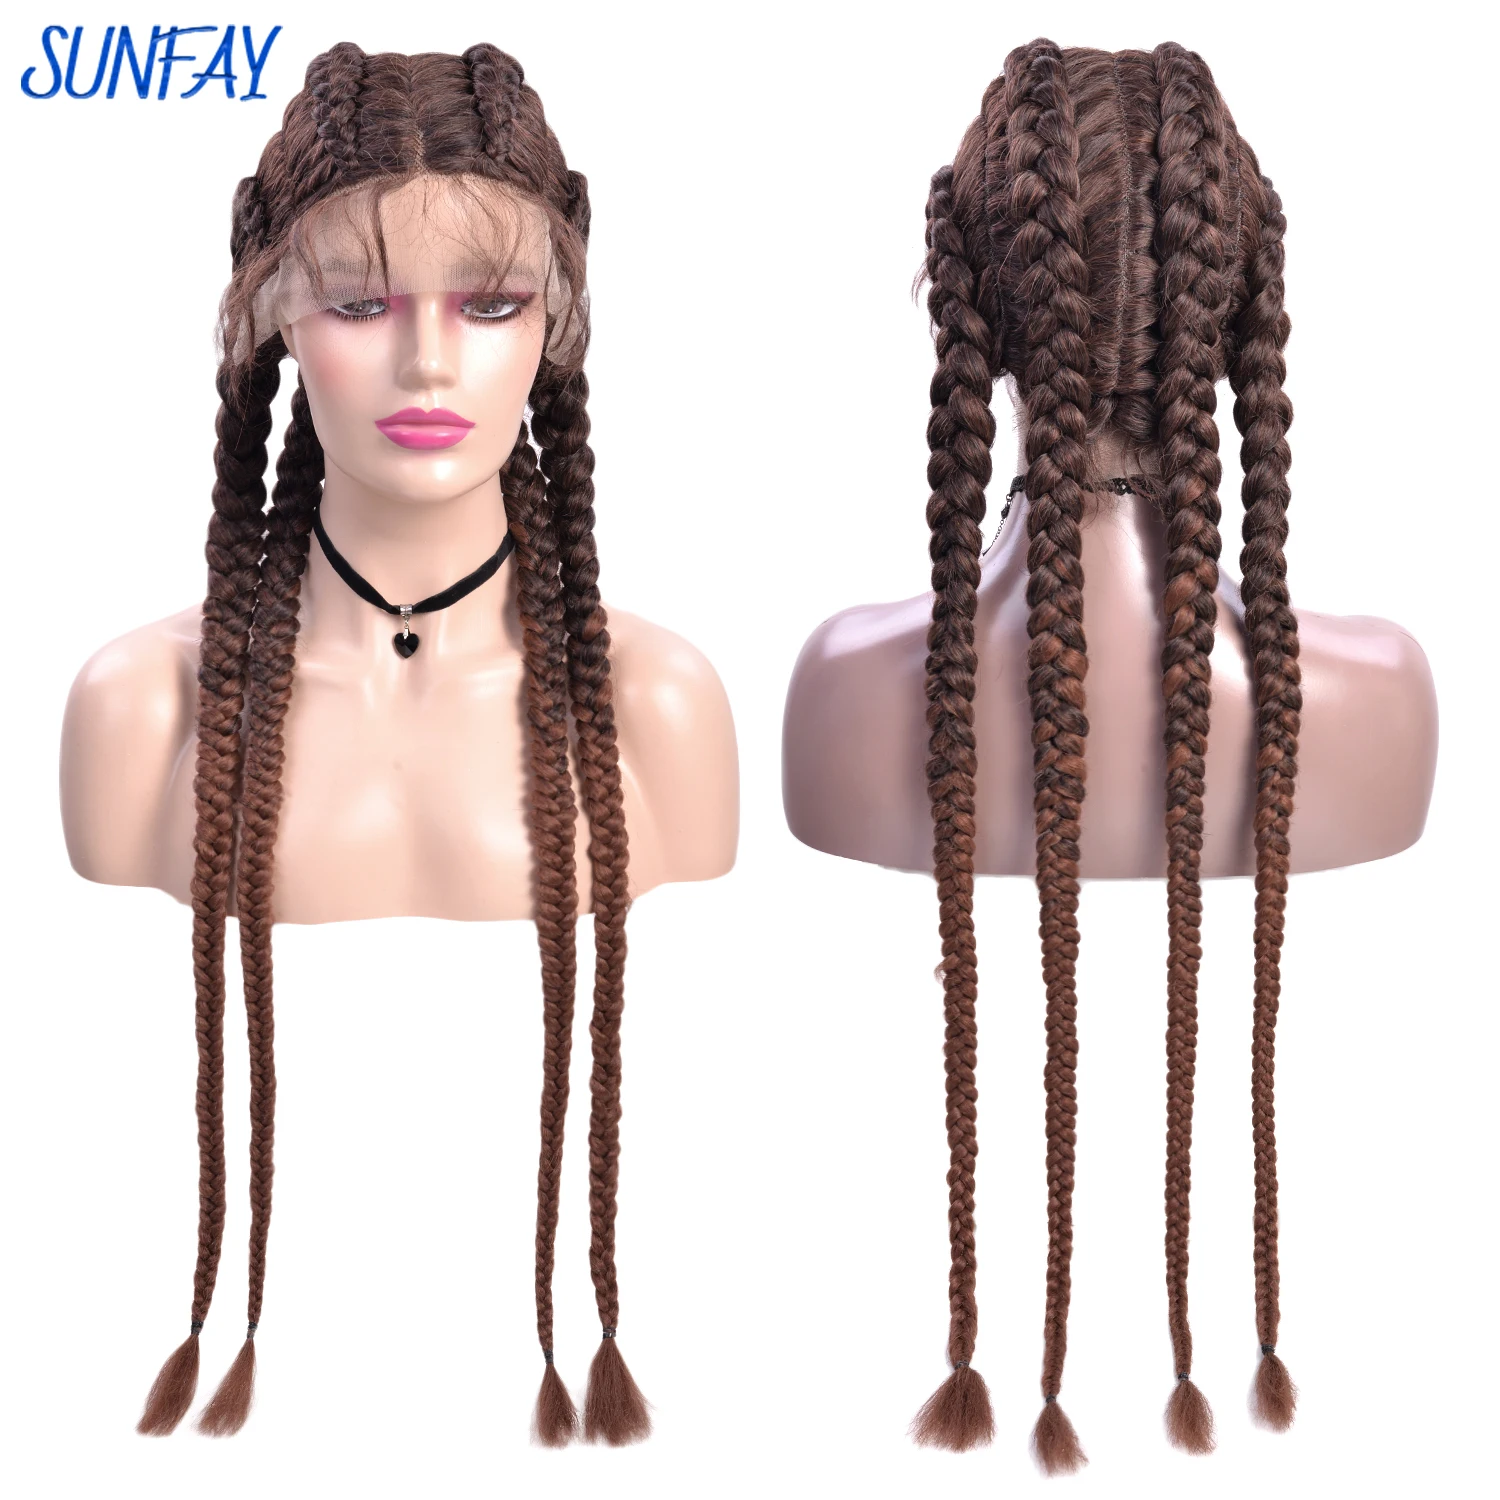 36inches Braided Lace Front Wigs With Baby Hair Double Dutch Box Braided Twist Synthetic Braids Lace Frontal Wig For Black Women